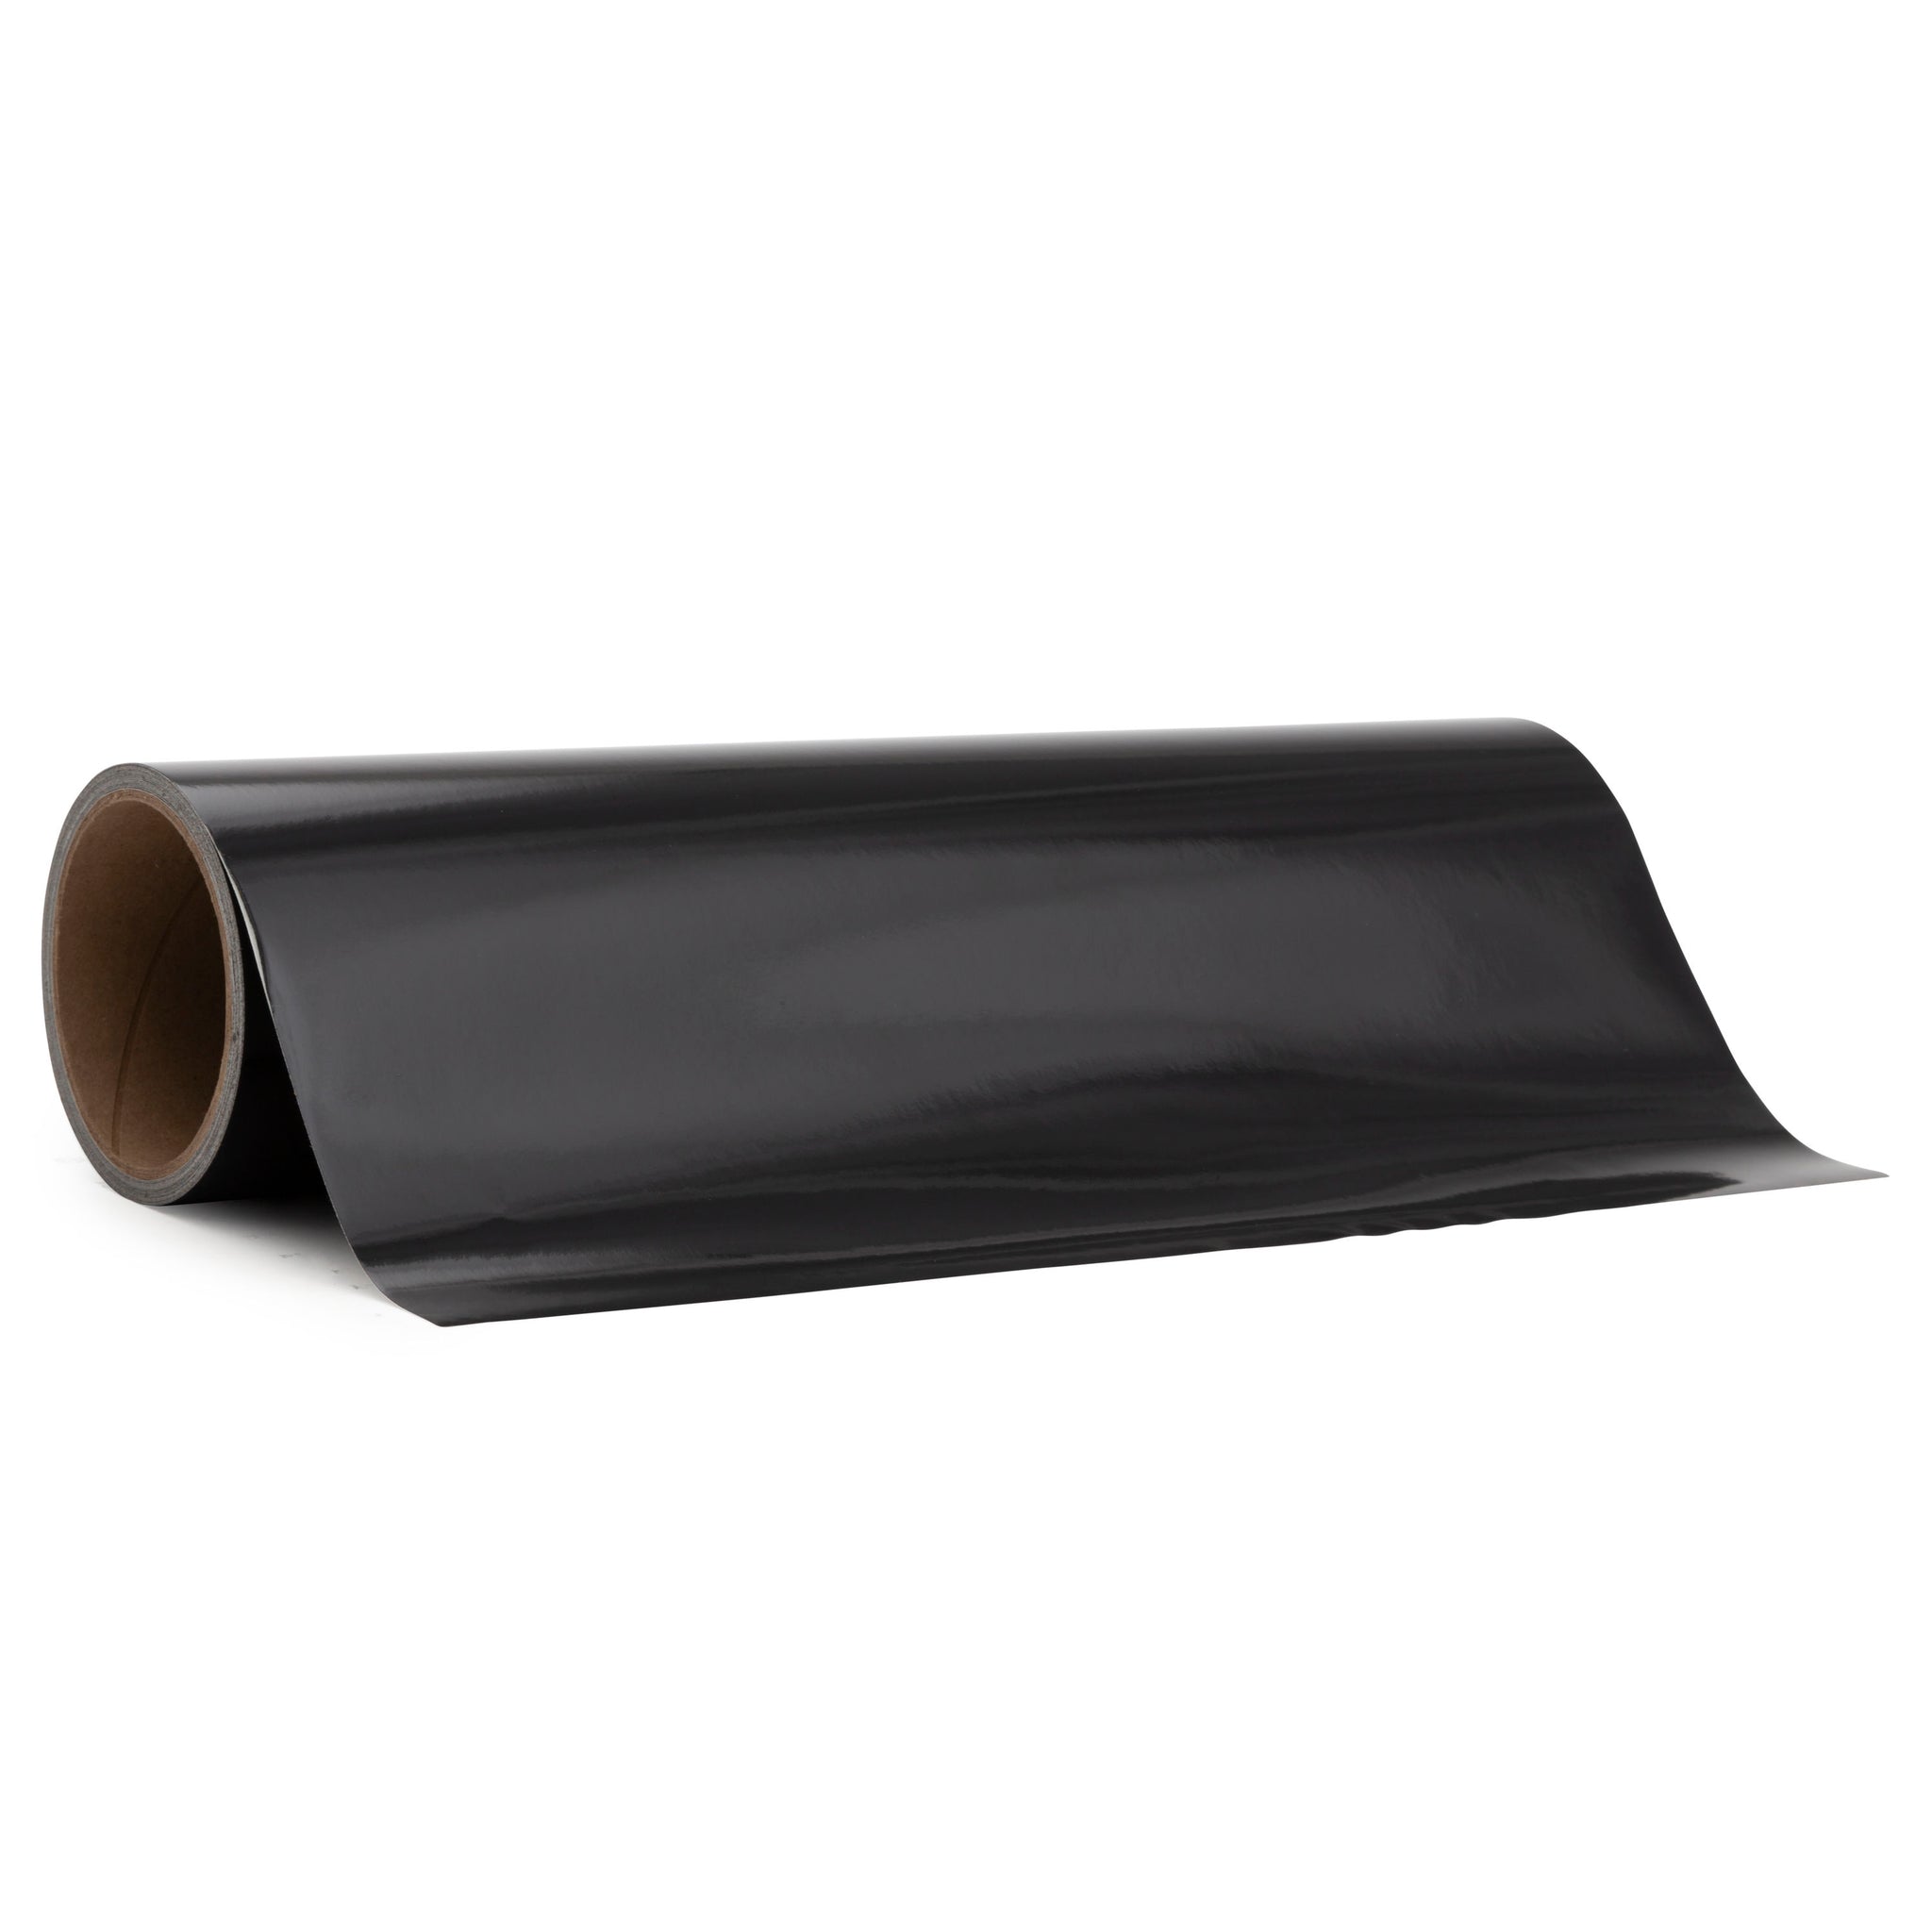 3M Reflective Vinyl - Black 680 Series: Visibility and Durability – Crafter  NV